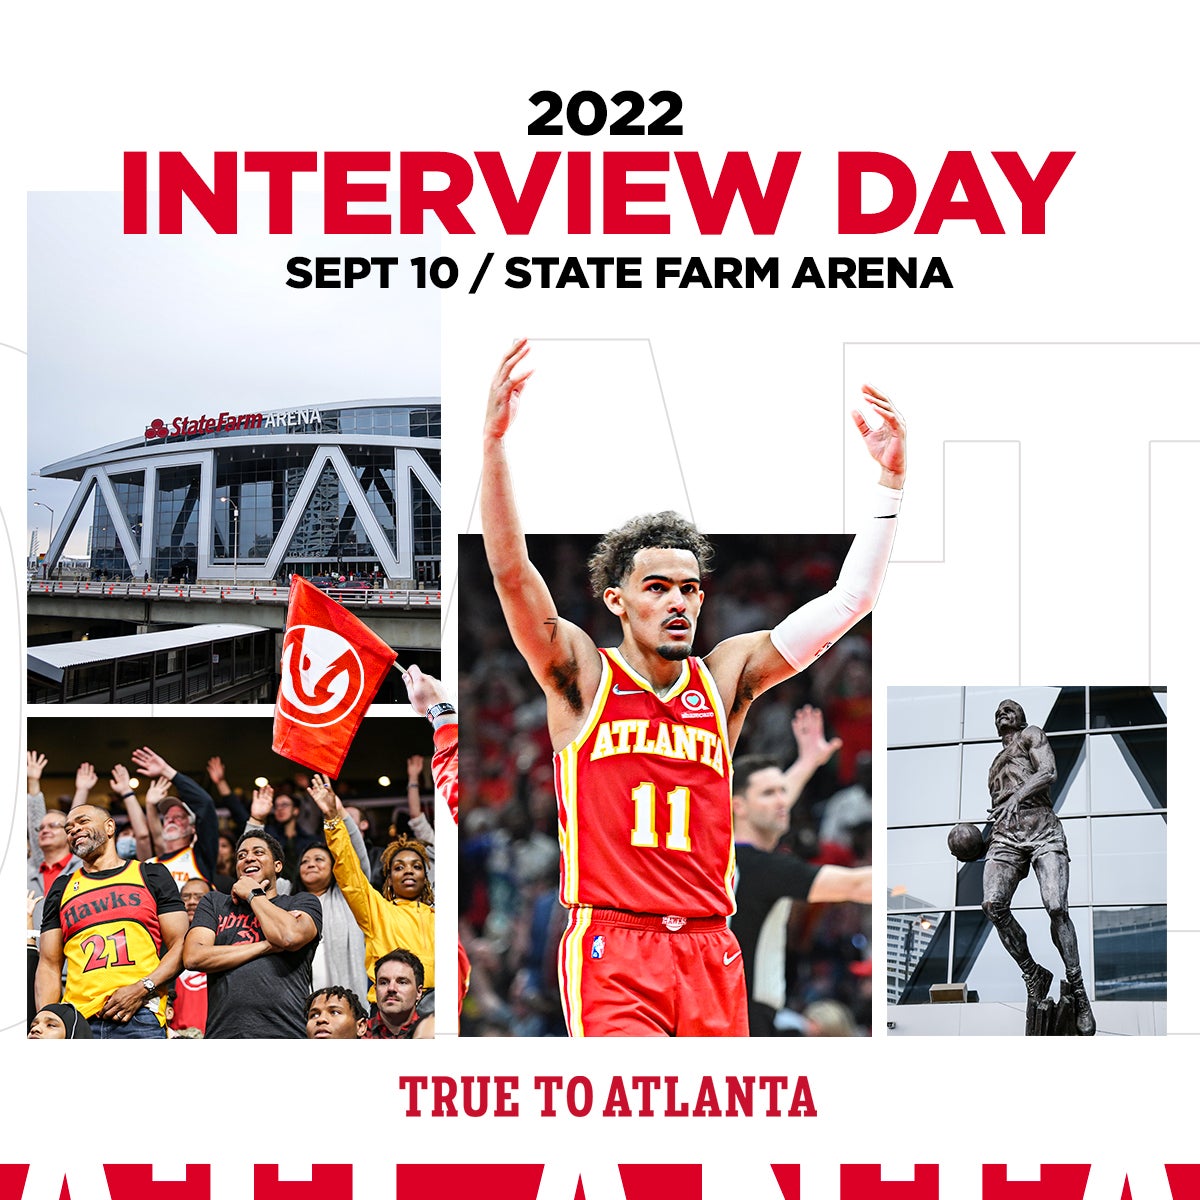 HAWKS AND STATE FARM ARENA TO HOST INAUGURAL ‘INTERVIEW DAY’ ON SATURDAY, SEPT. 10